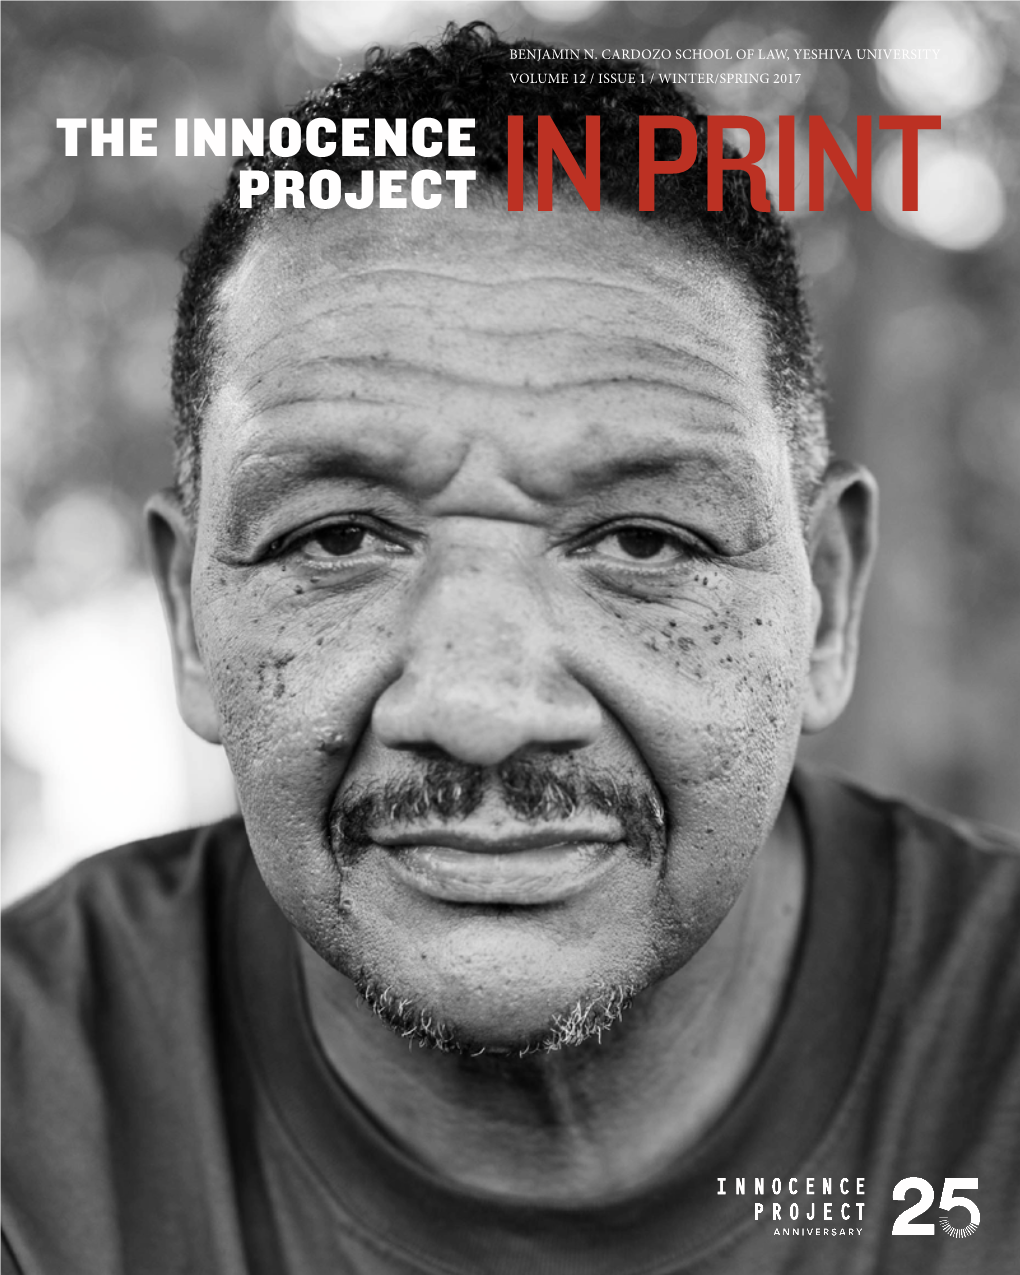 The Innocence Project in Print